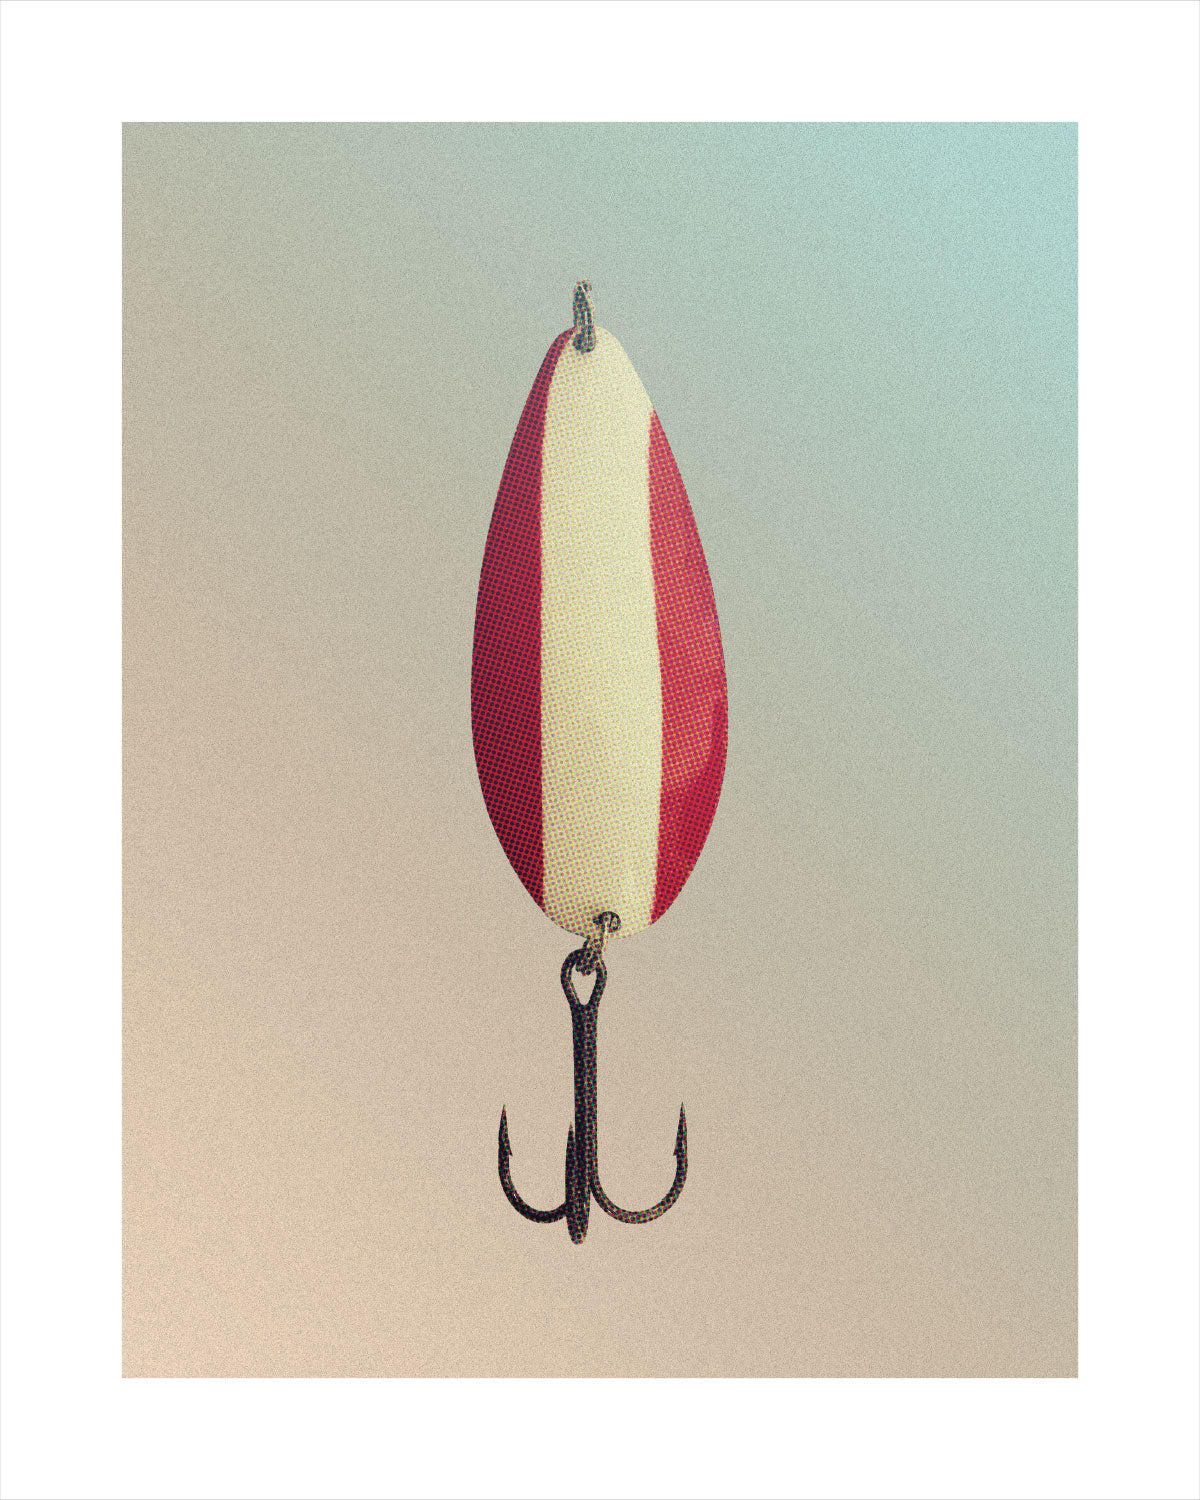 The Red Devil' Fishing Lure